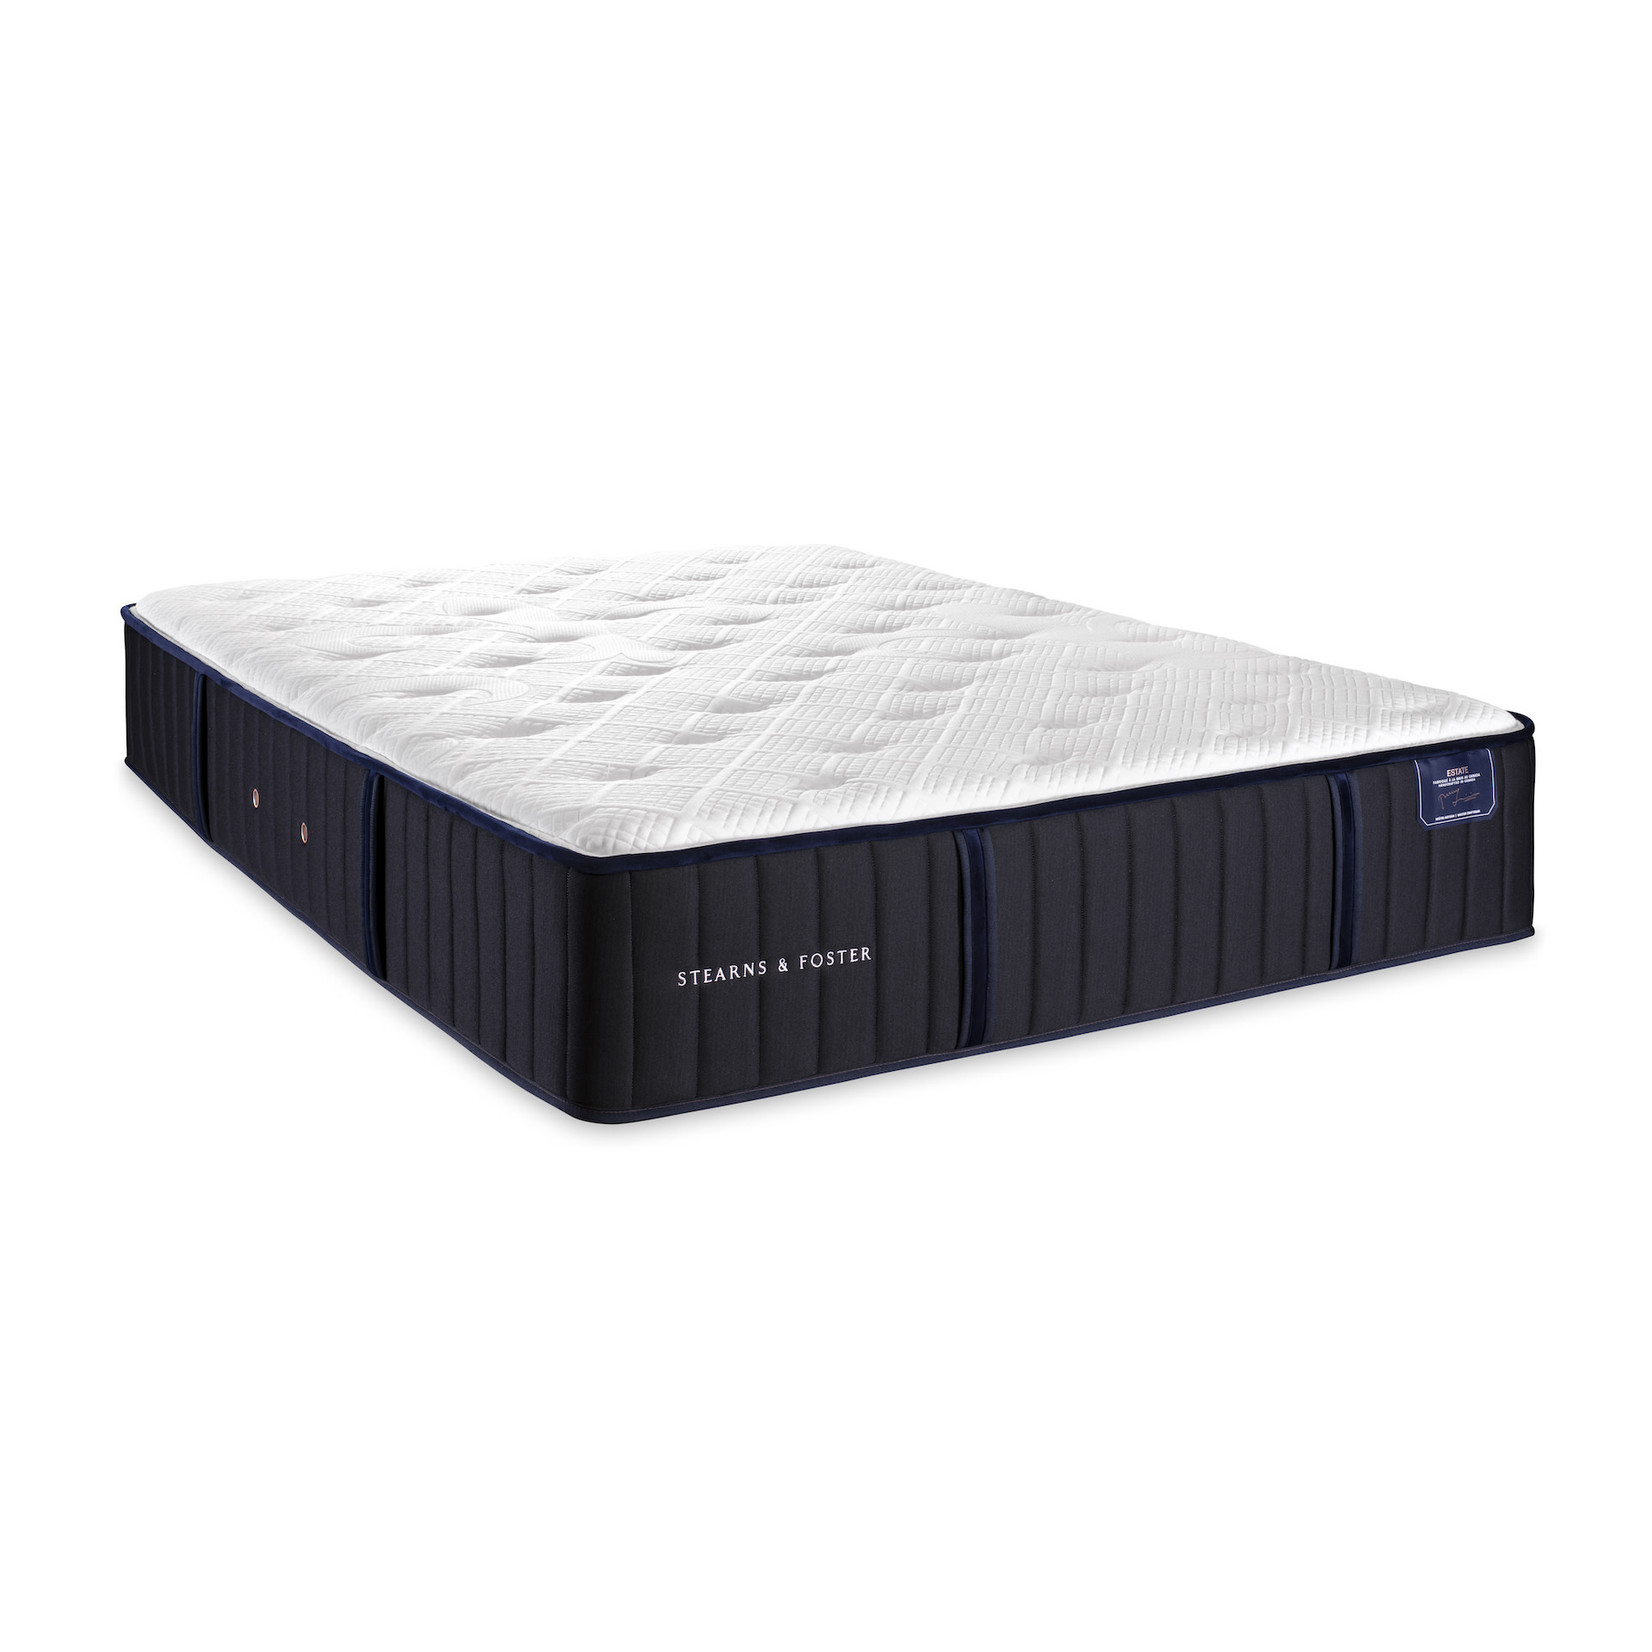 STEARN AND FOSTER AMBER SHORE S&F MATTRESS CLEARANCE